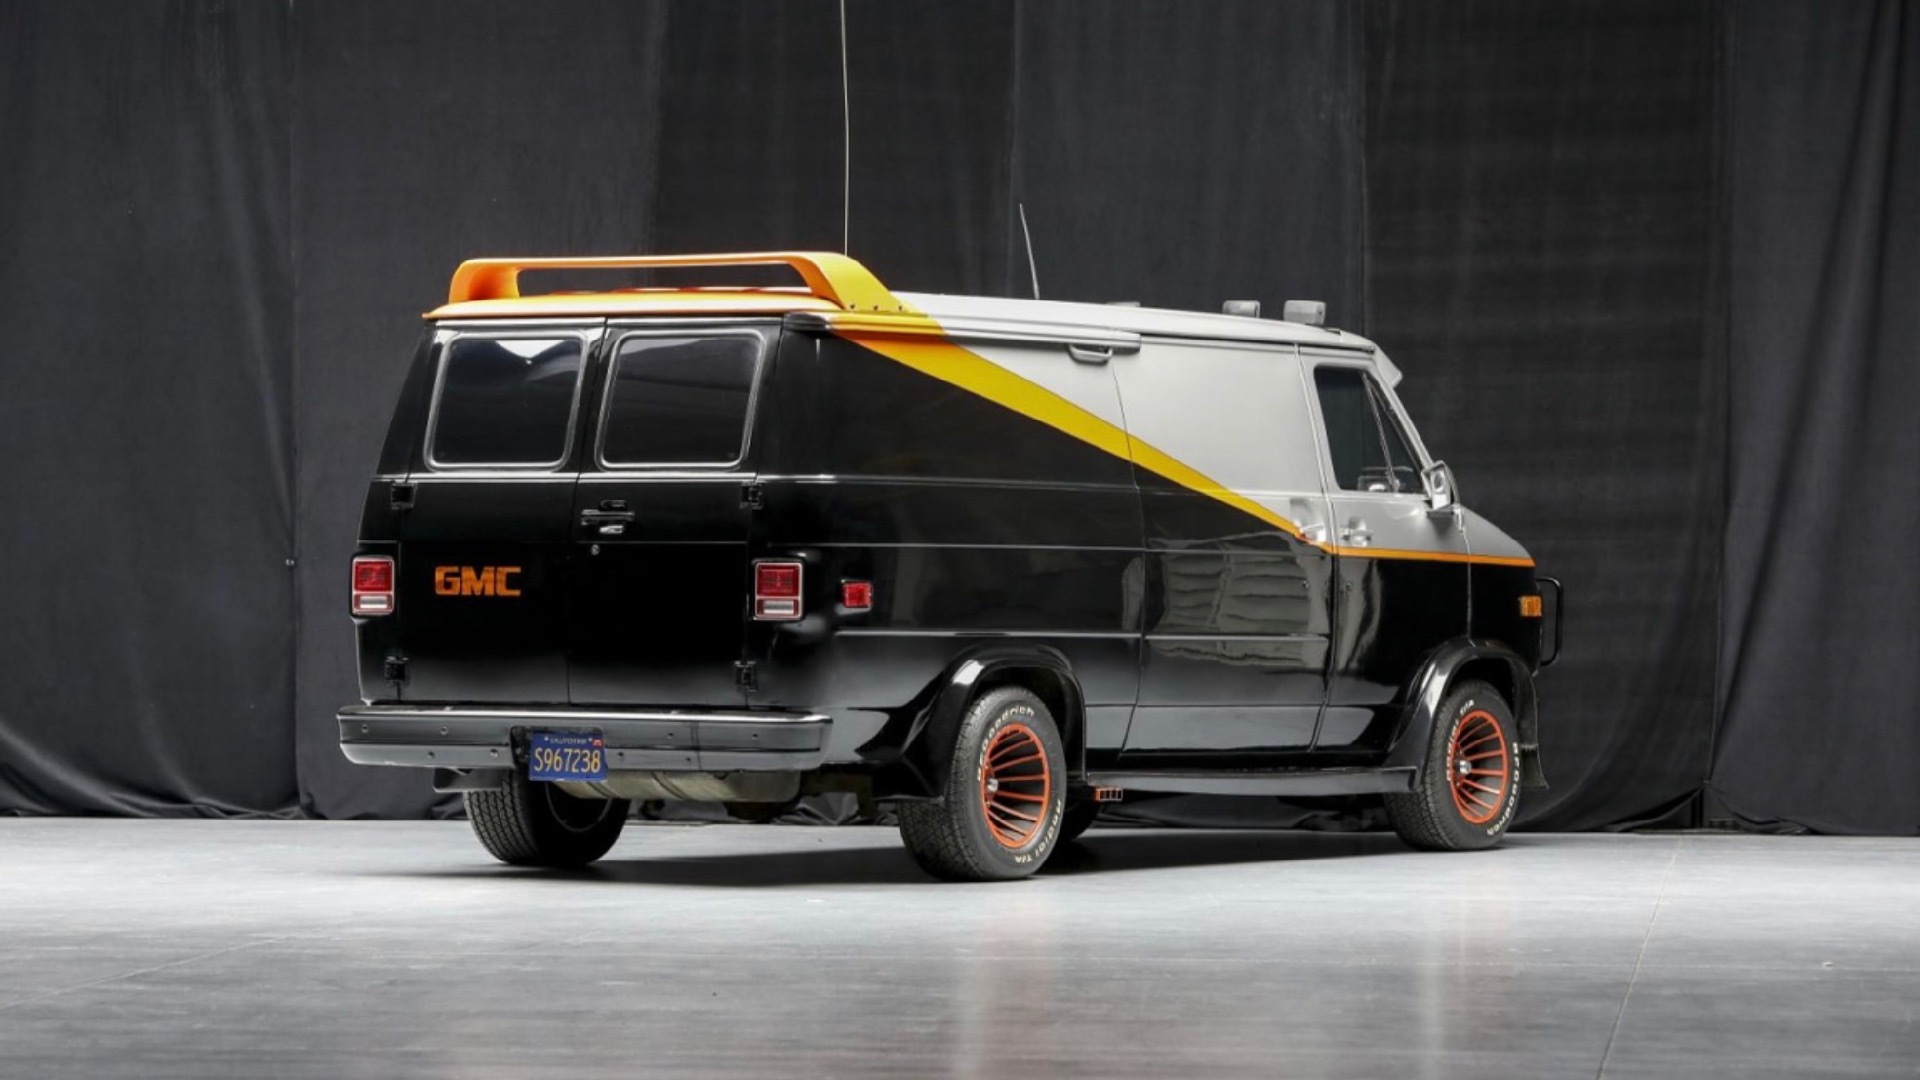 Officially licensed "A-Team" van (Photo by Worldwide Auctioneers)